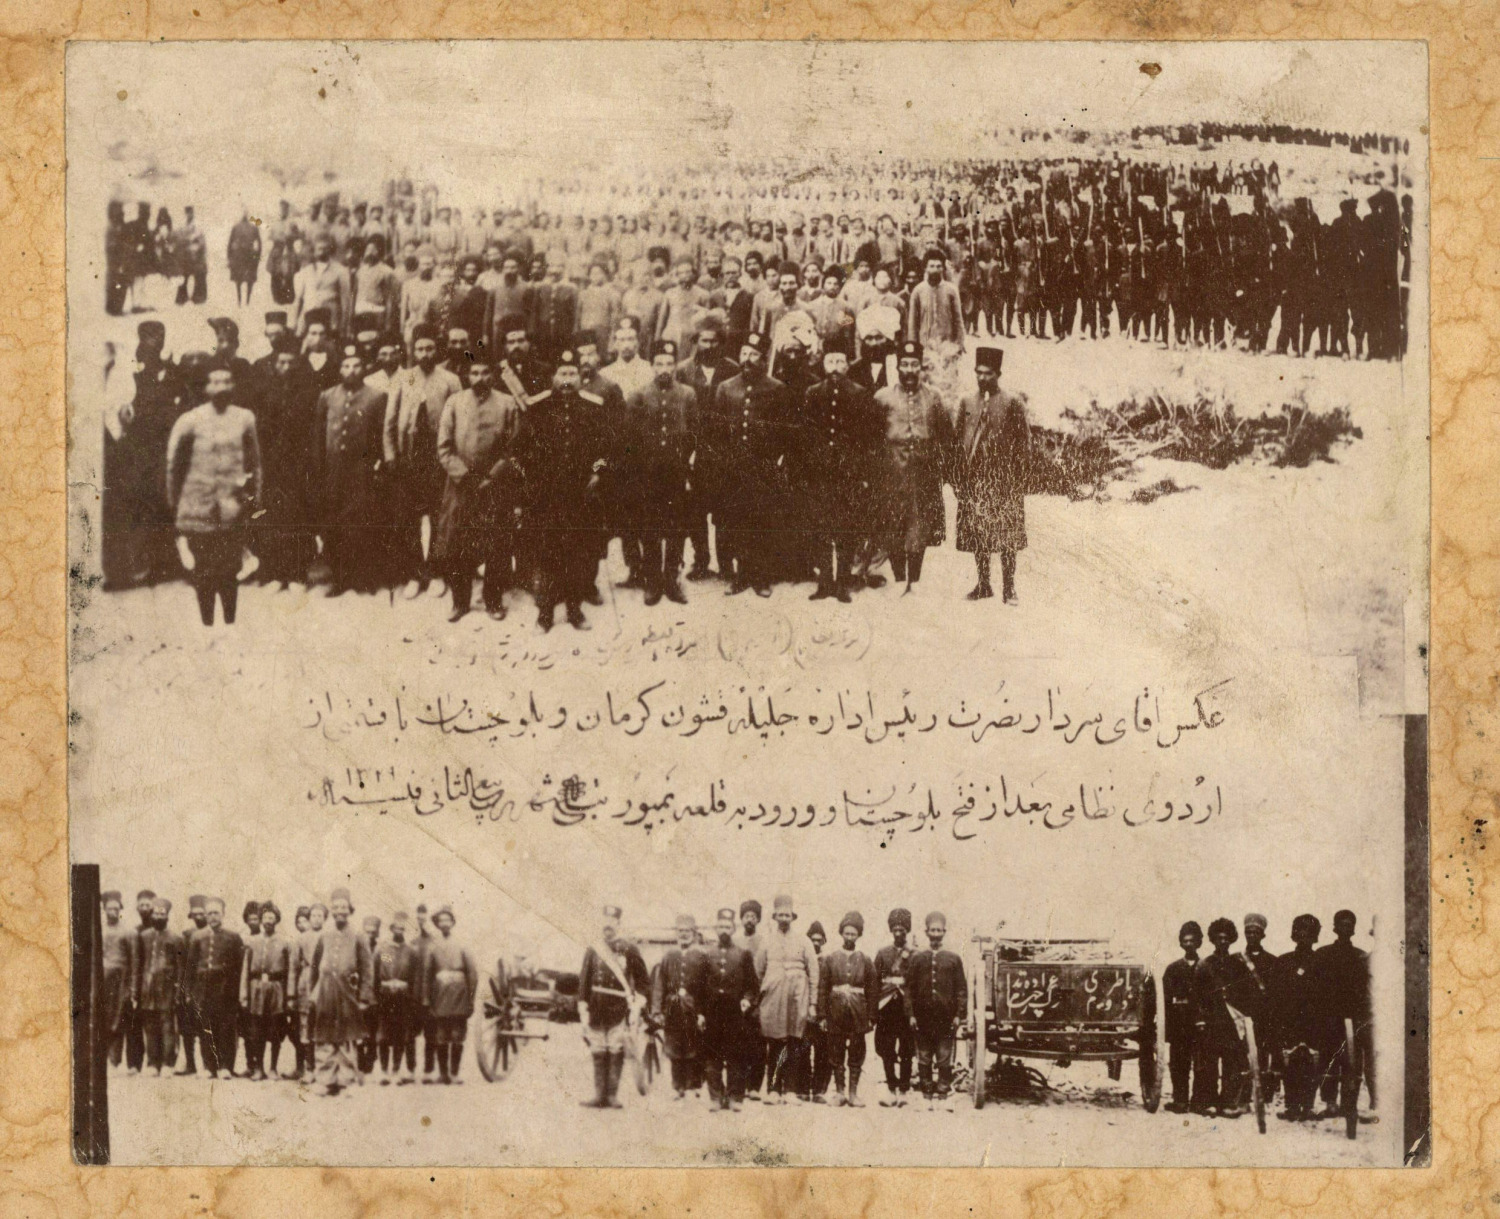 Sardar Nosrat and his Army after the Conquest of Baluchistan, Iran.  Photographe